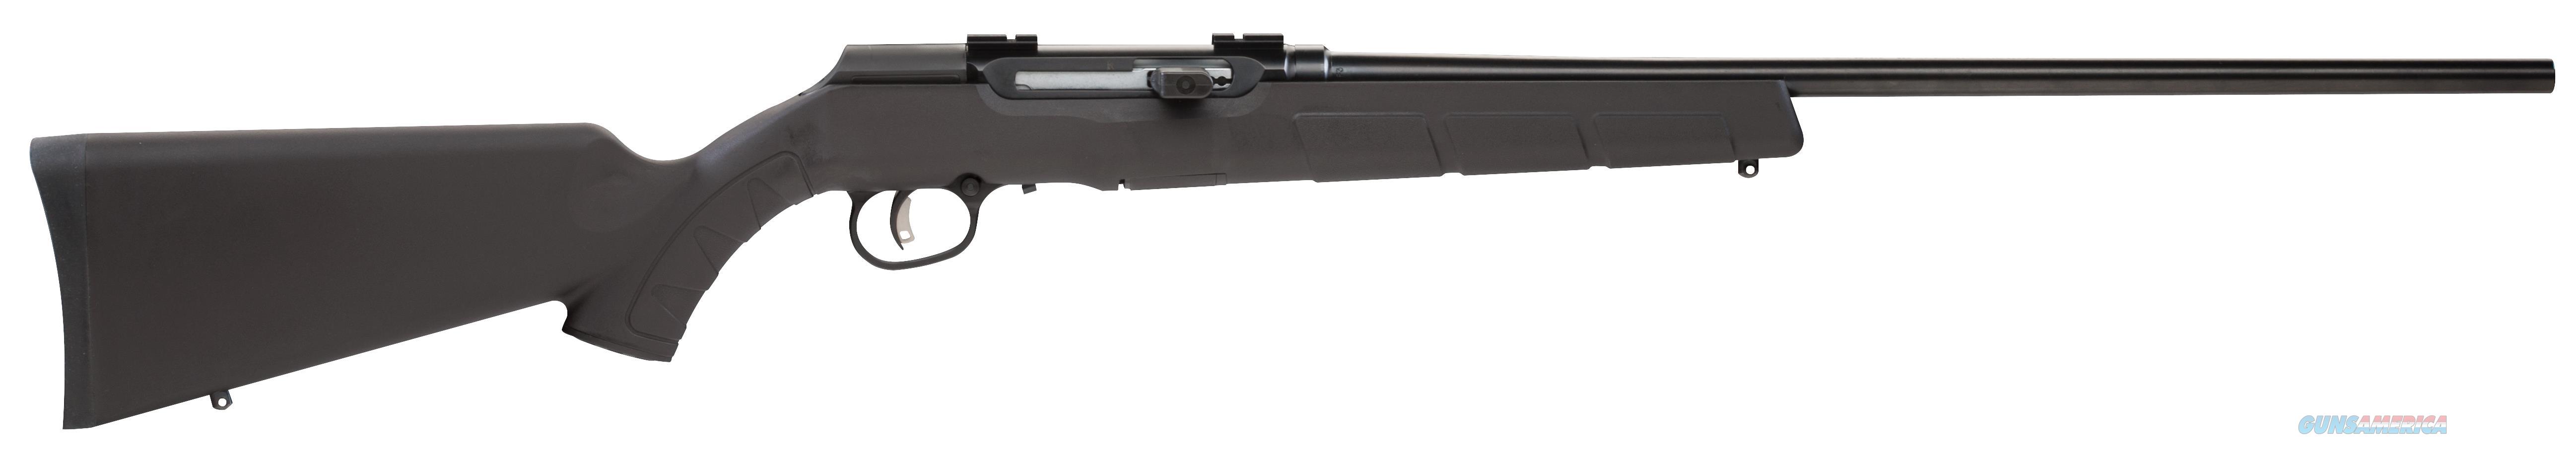 Savage 47400 A22 Magnum Semi Automa For Sale At